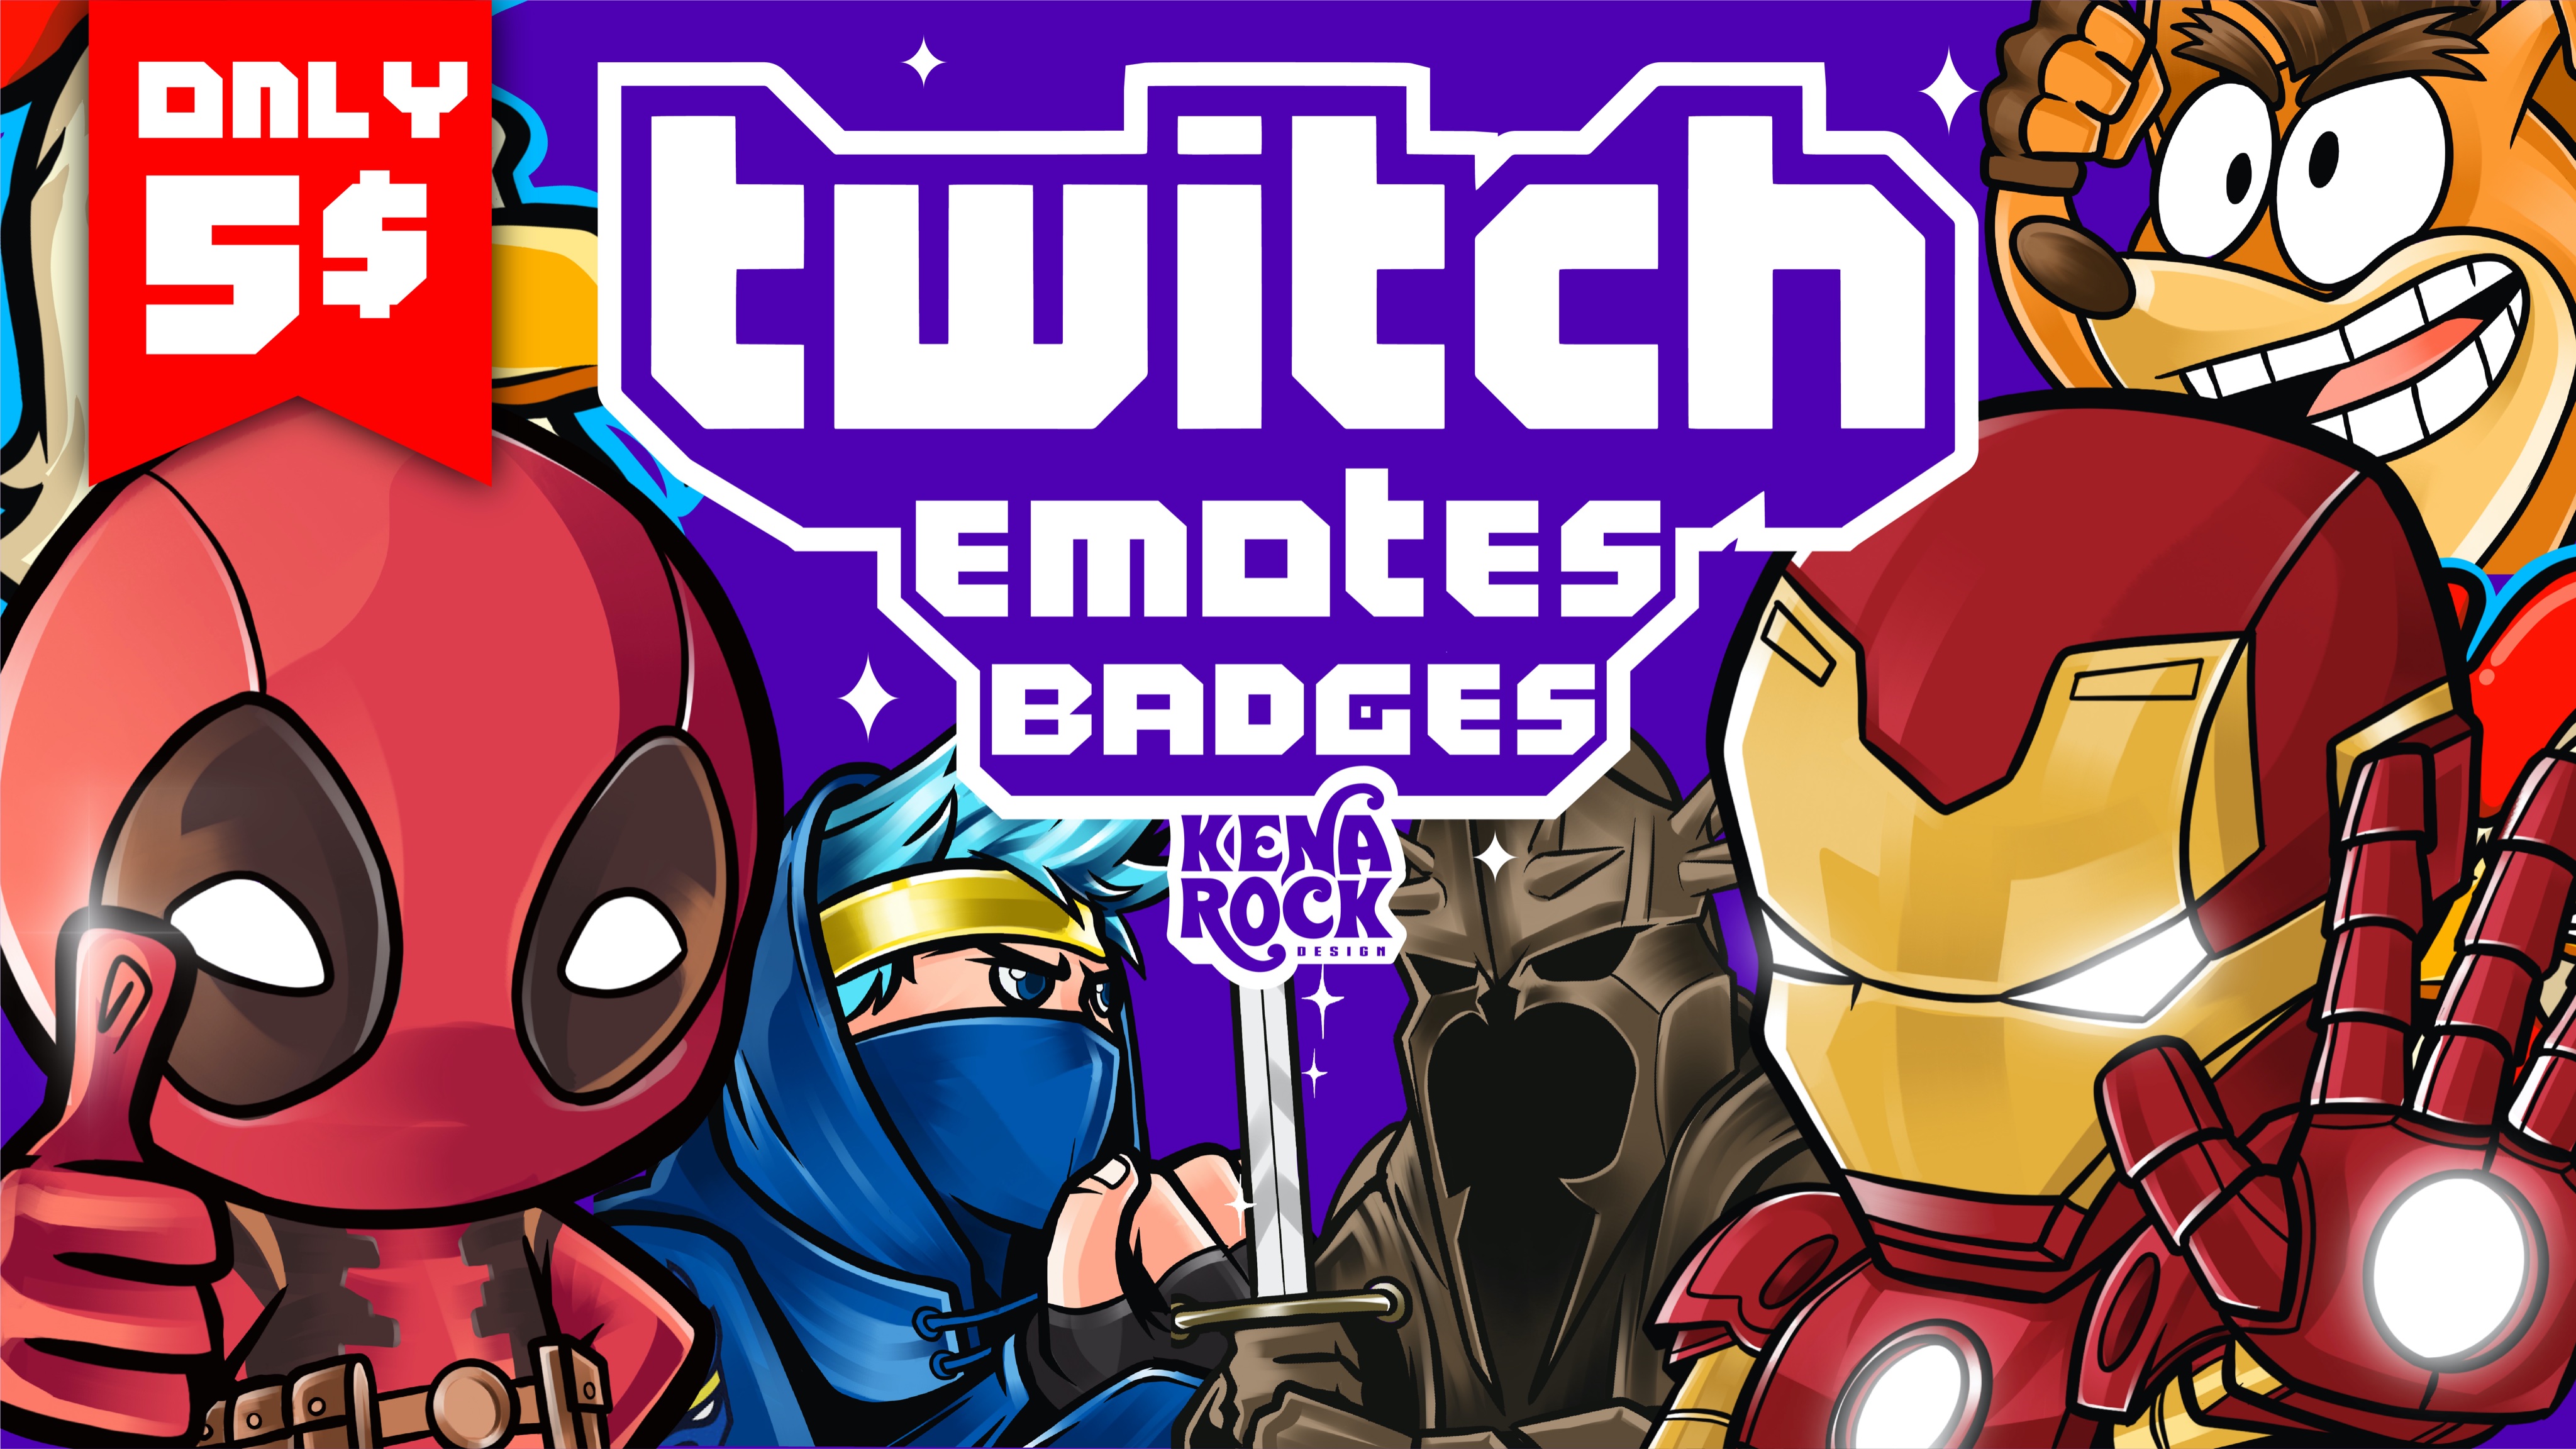 Custom Twitch and Discord Badges